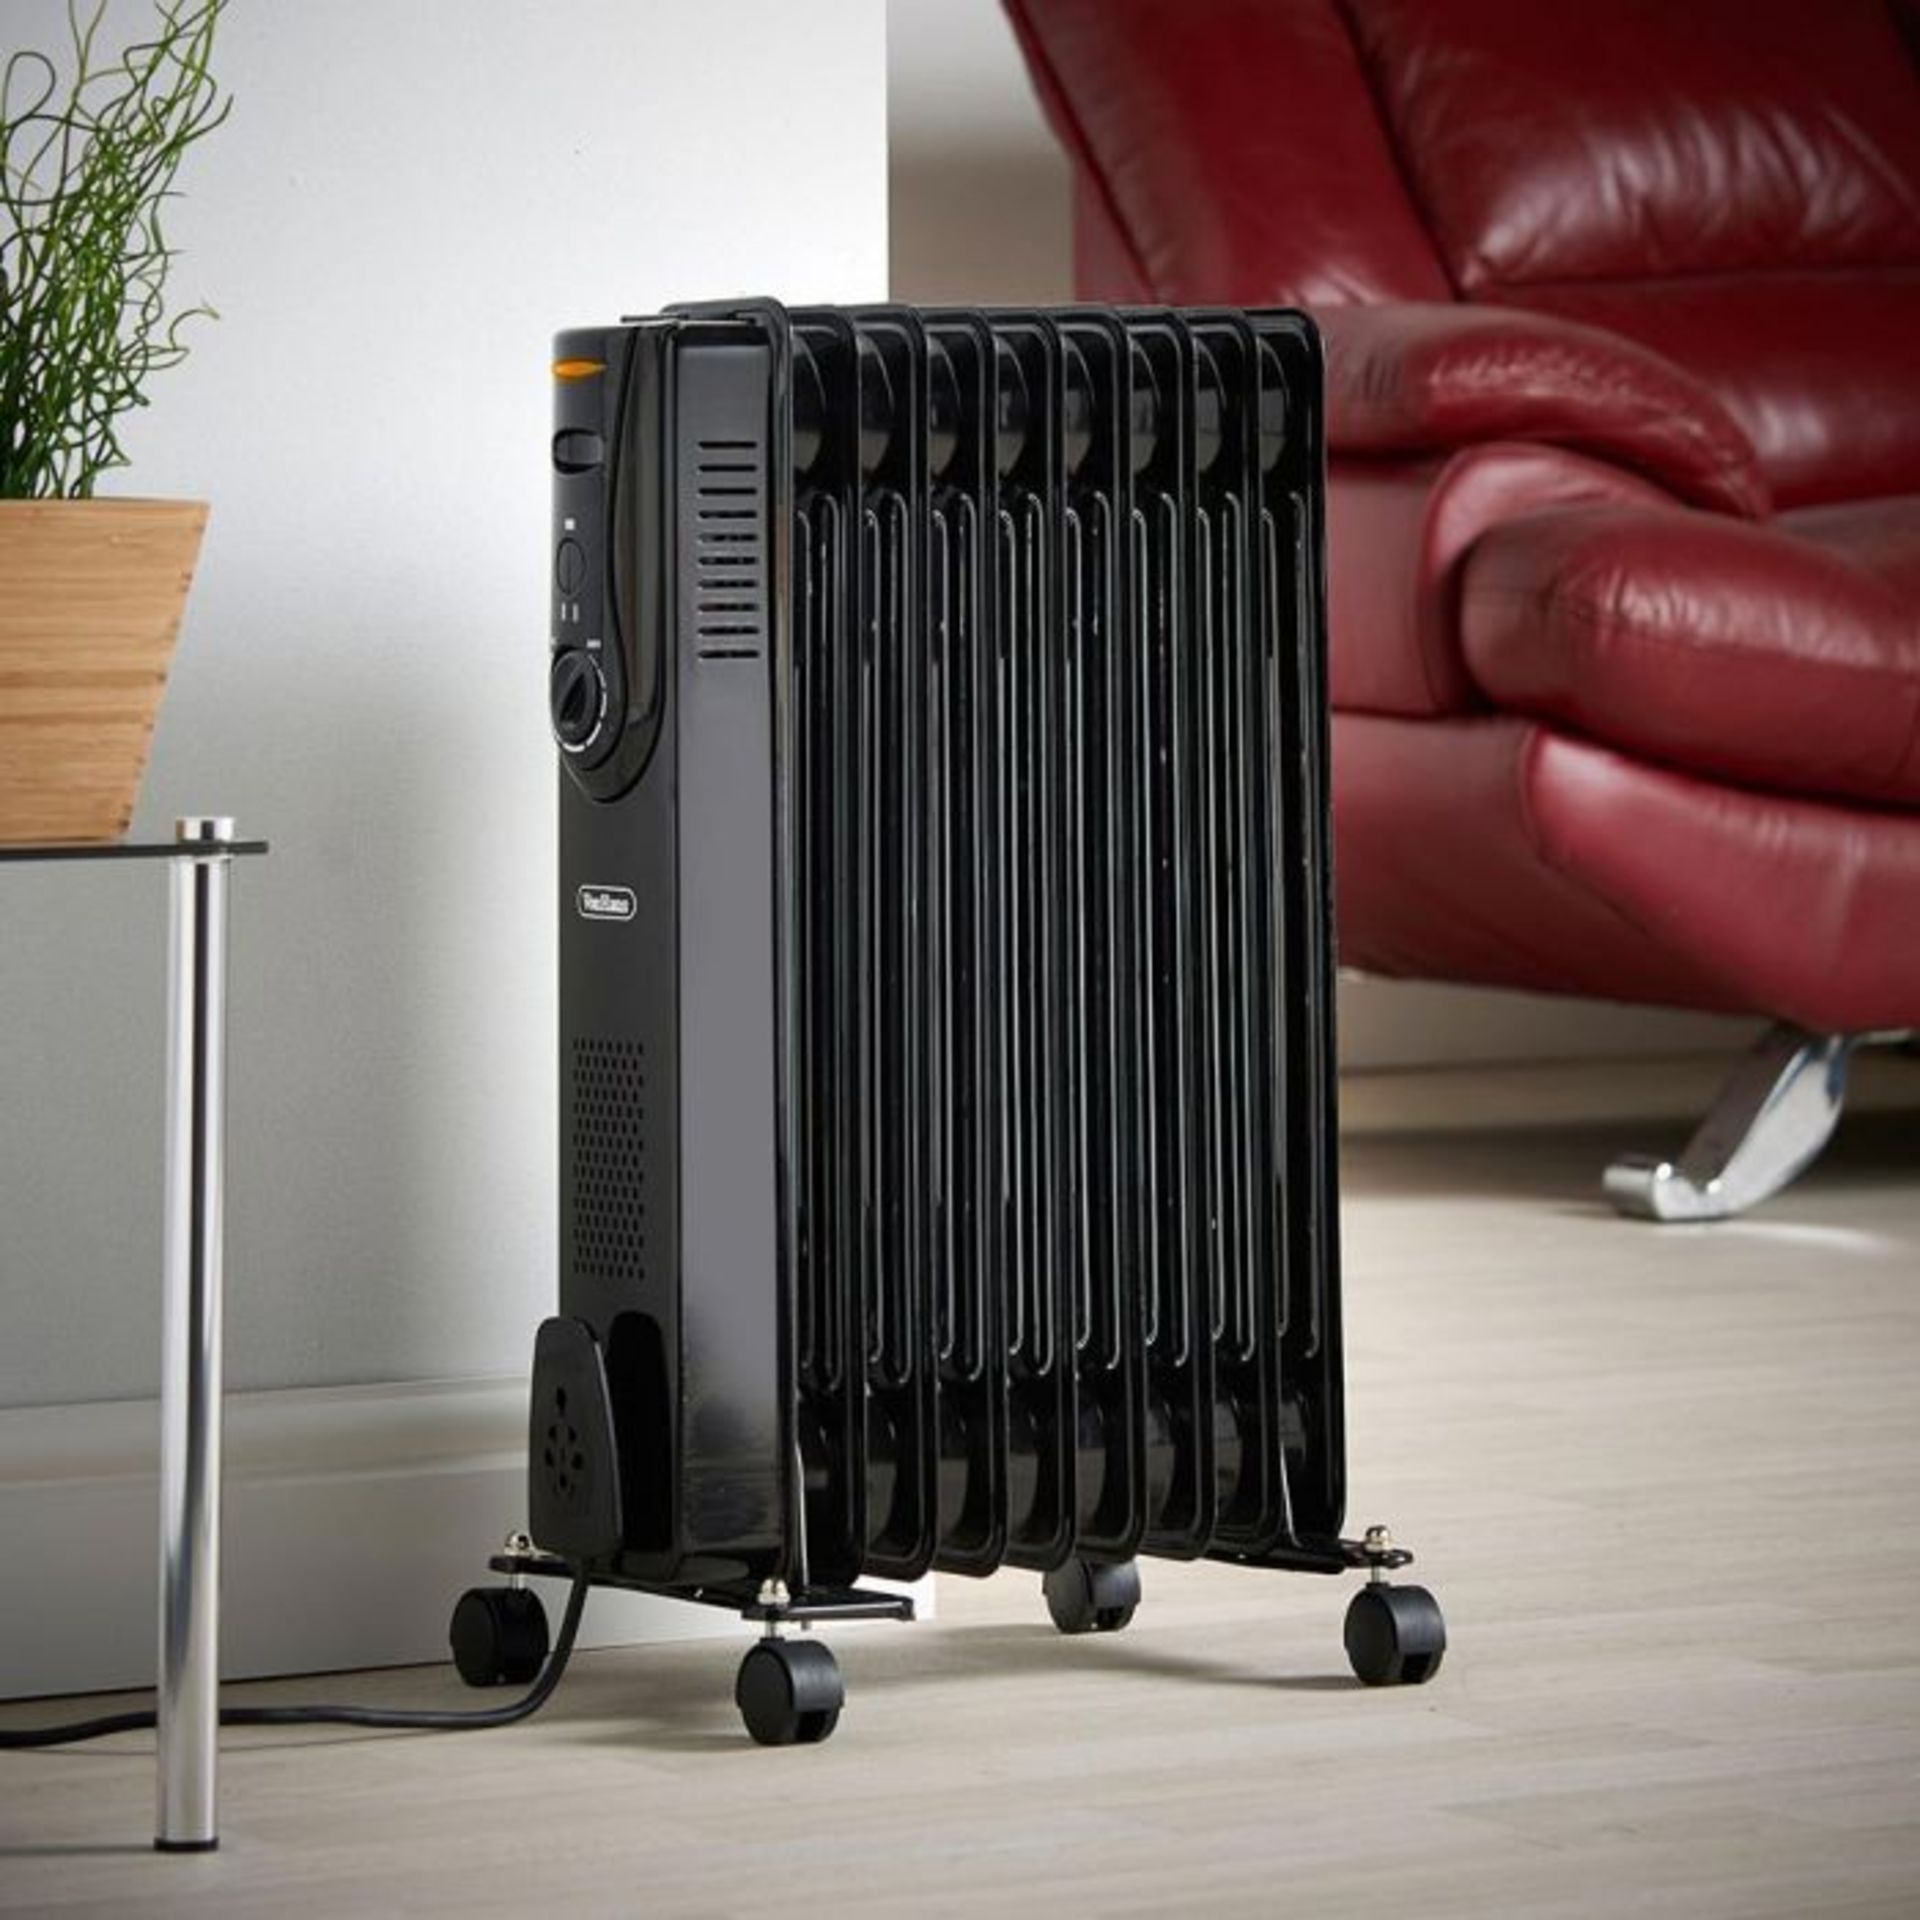 (V131) 9 Fin 2000W Oil Filled Radiator - Black Powerful 2000W radiator with 9 oil-filled fins ...